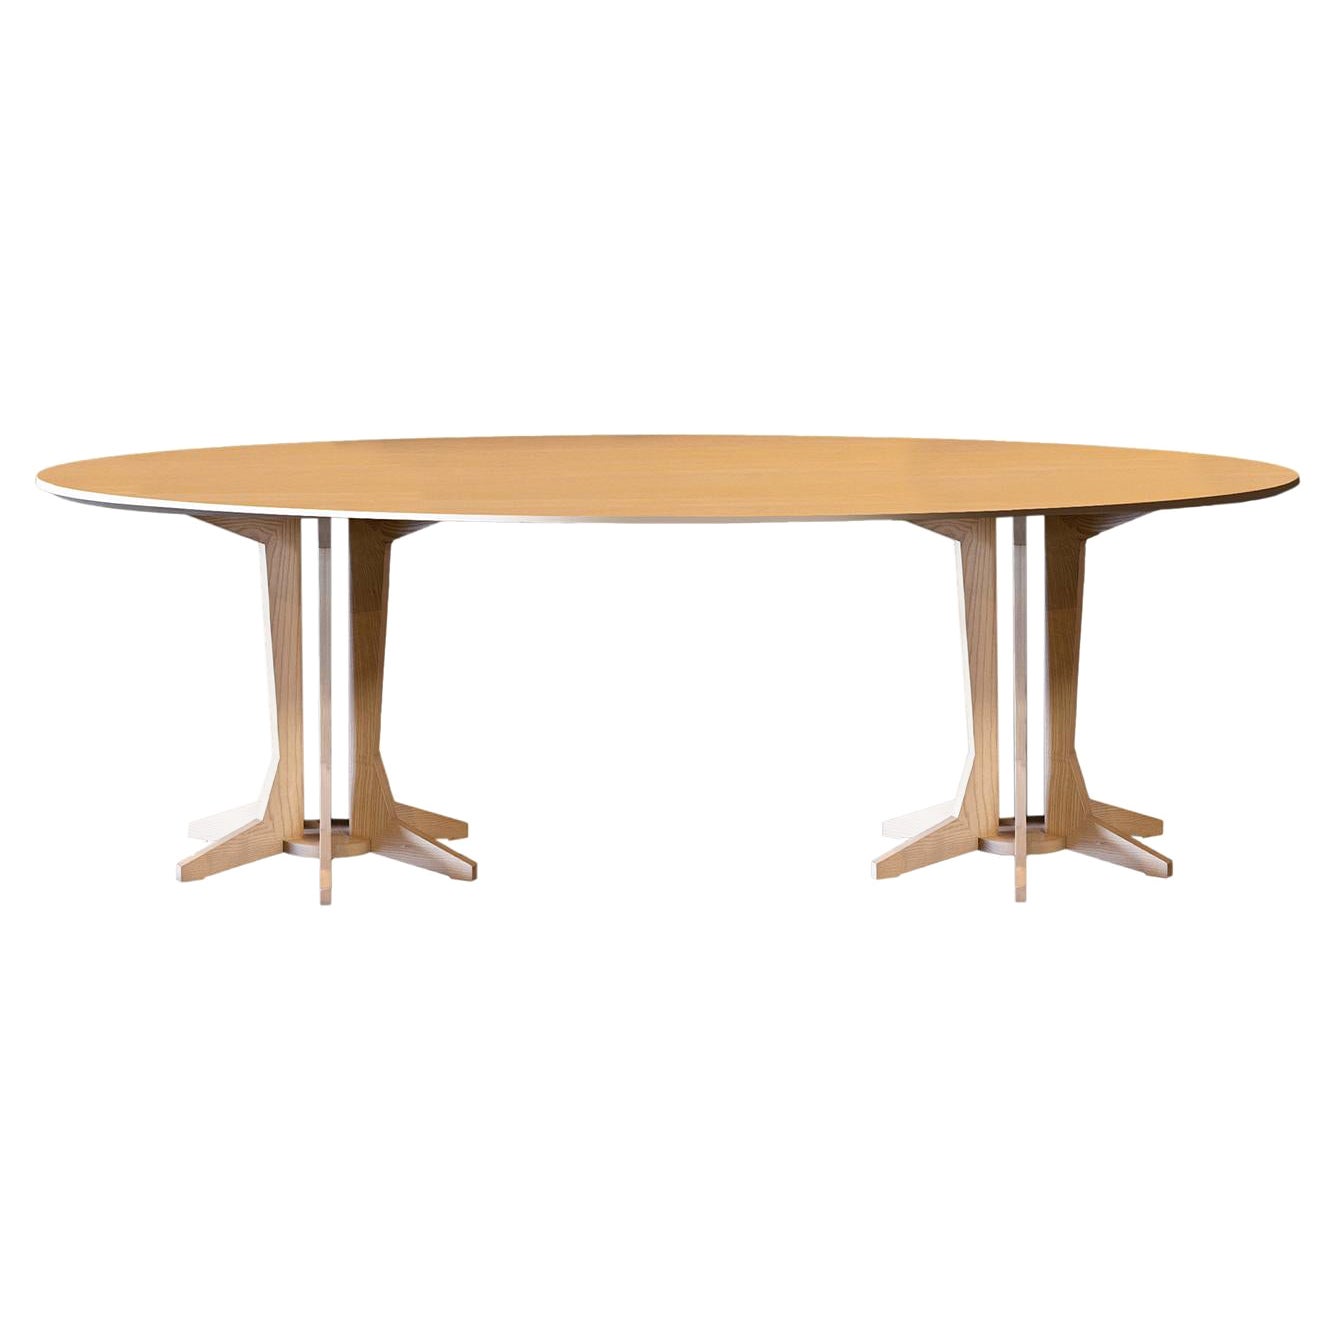 BADANO 1954 Oval Dining Table by Franco Albini